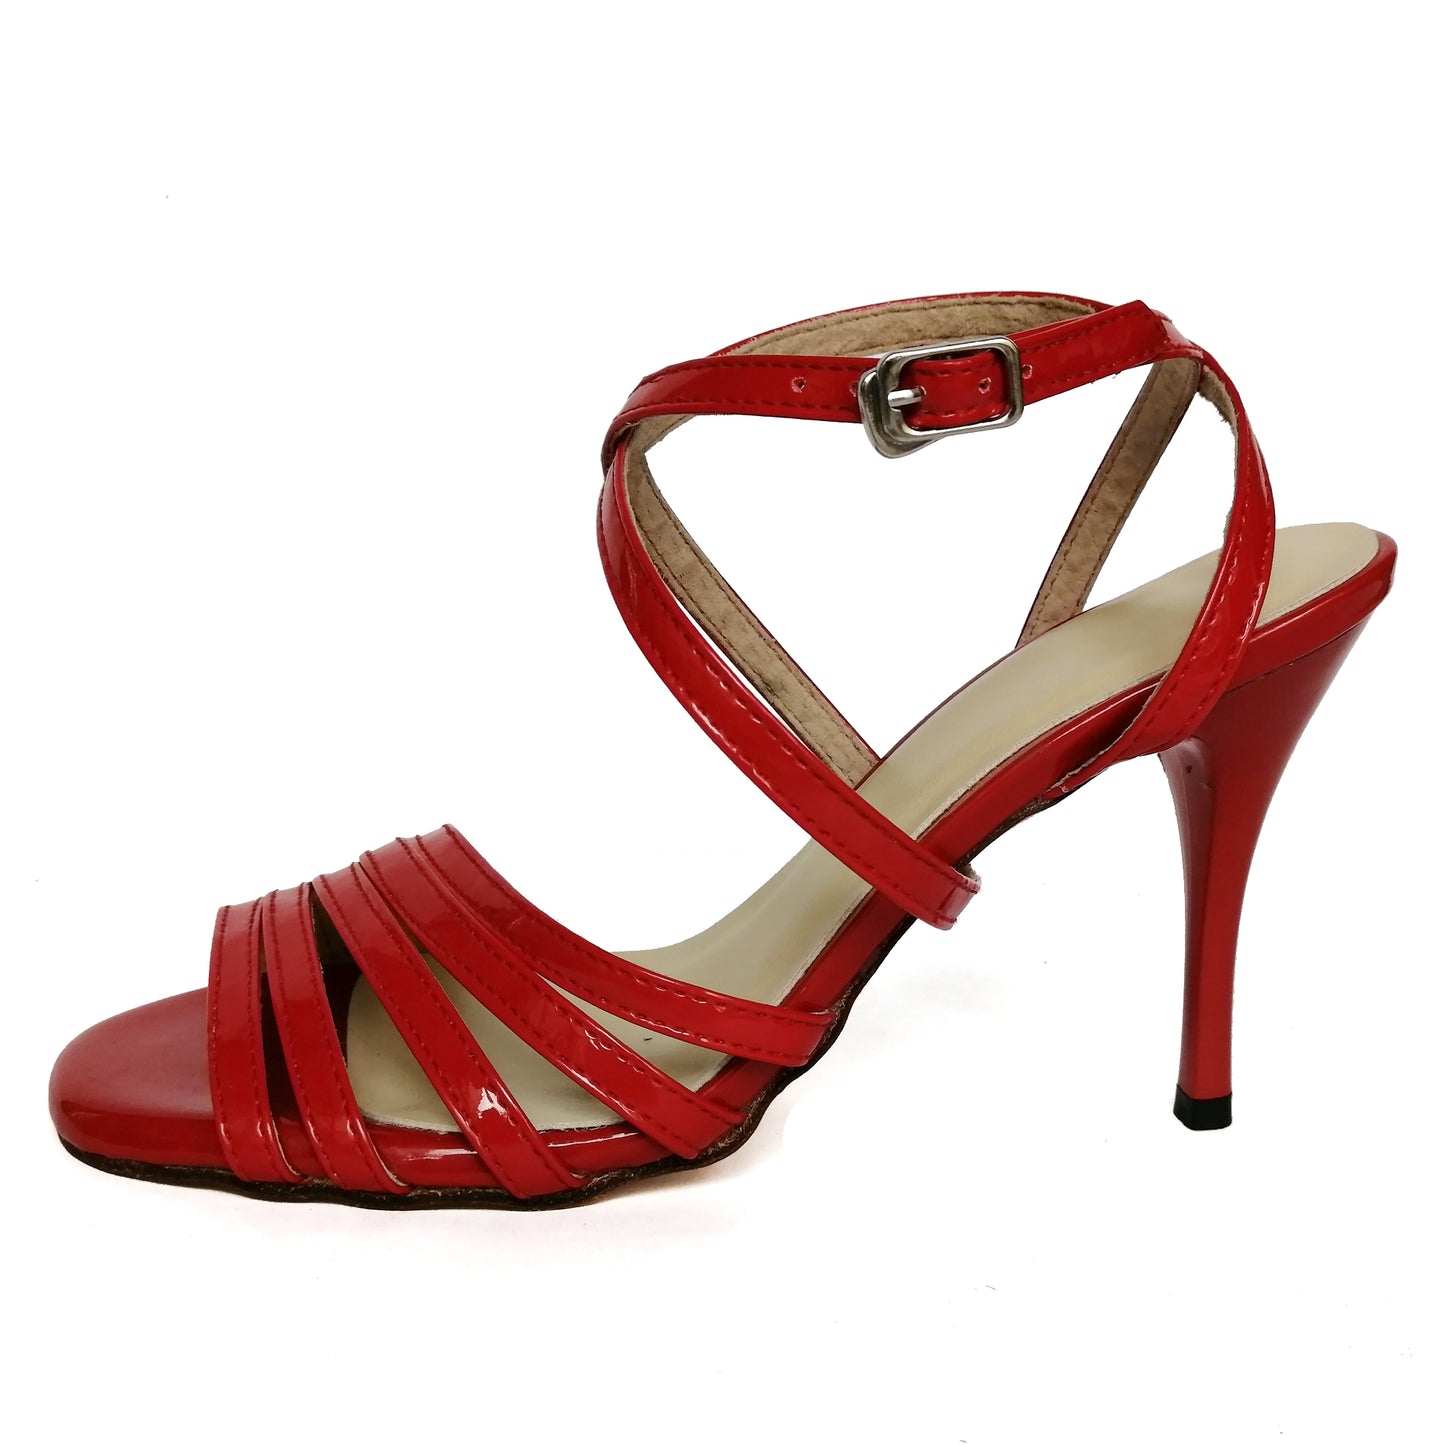 Pro Dancer Women's Argentine Tango Shoes High Heel Dance Sandals Leather Sole Red (PD9022A)